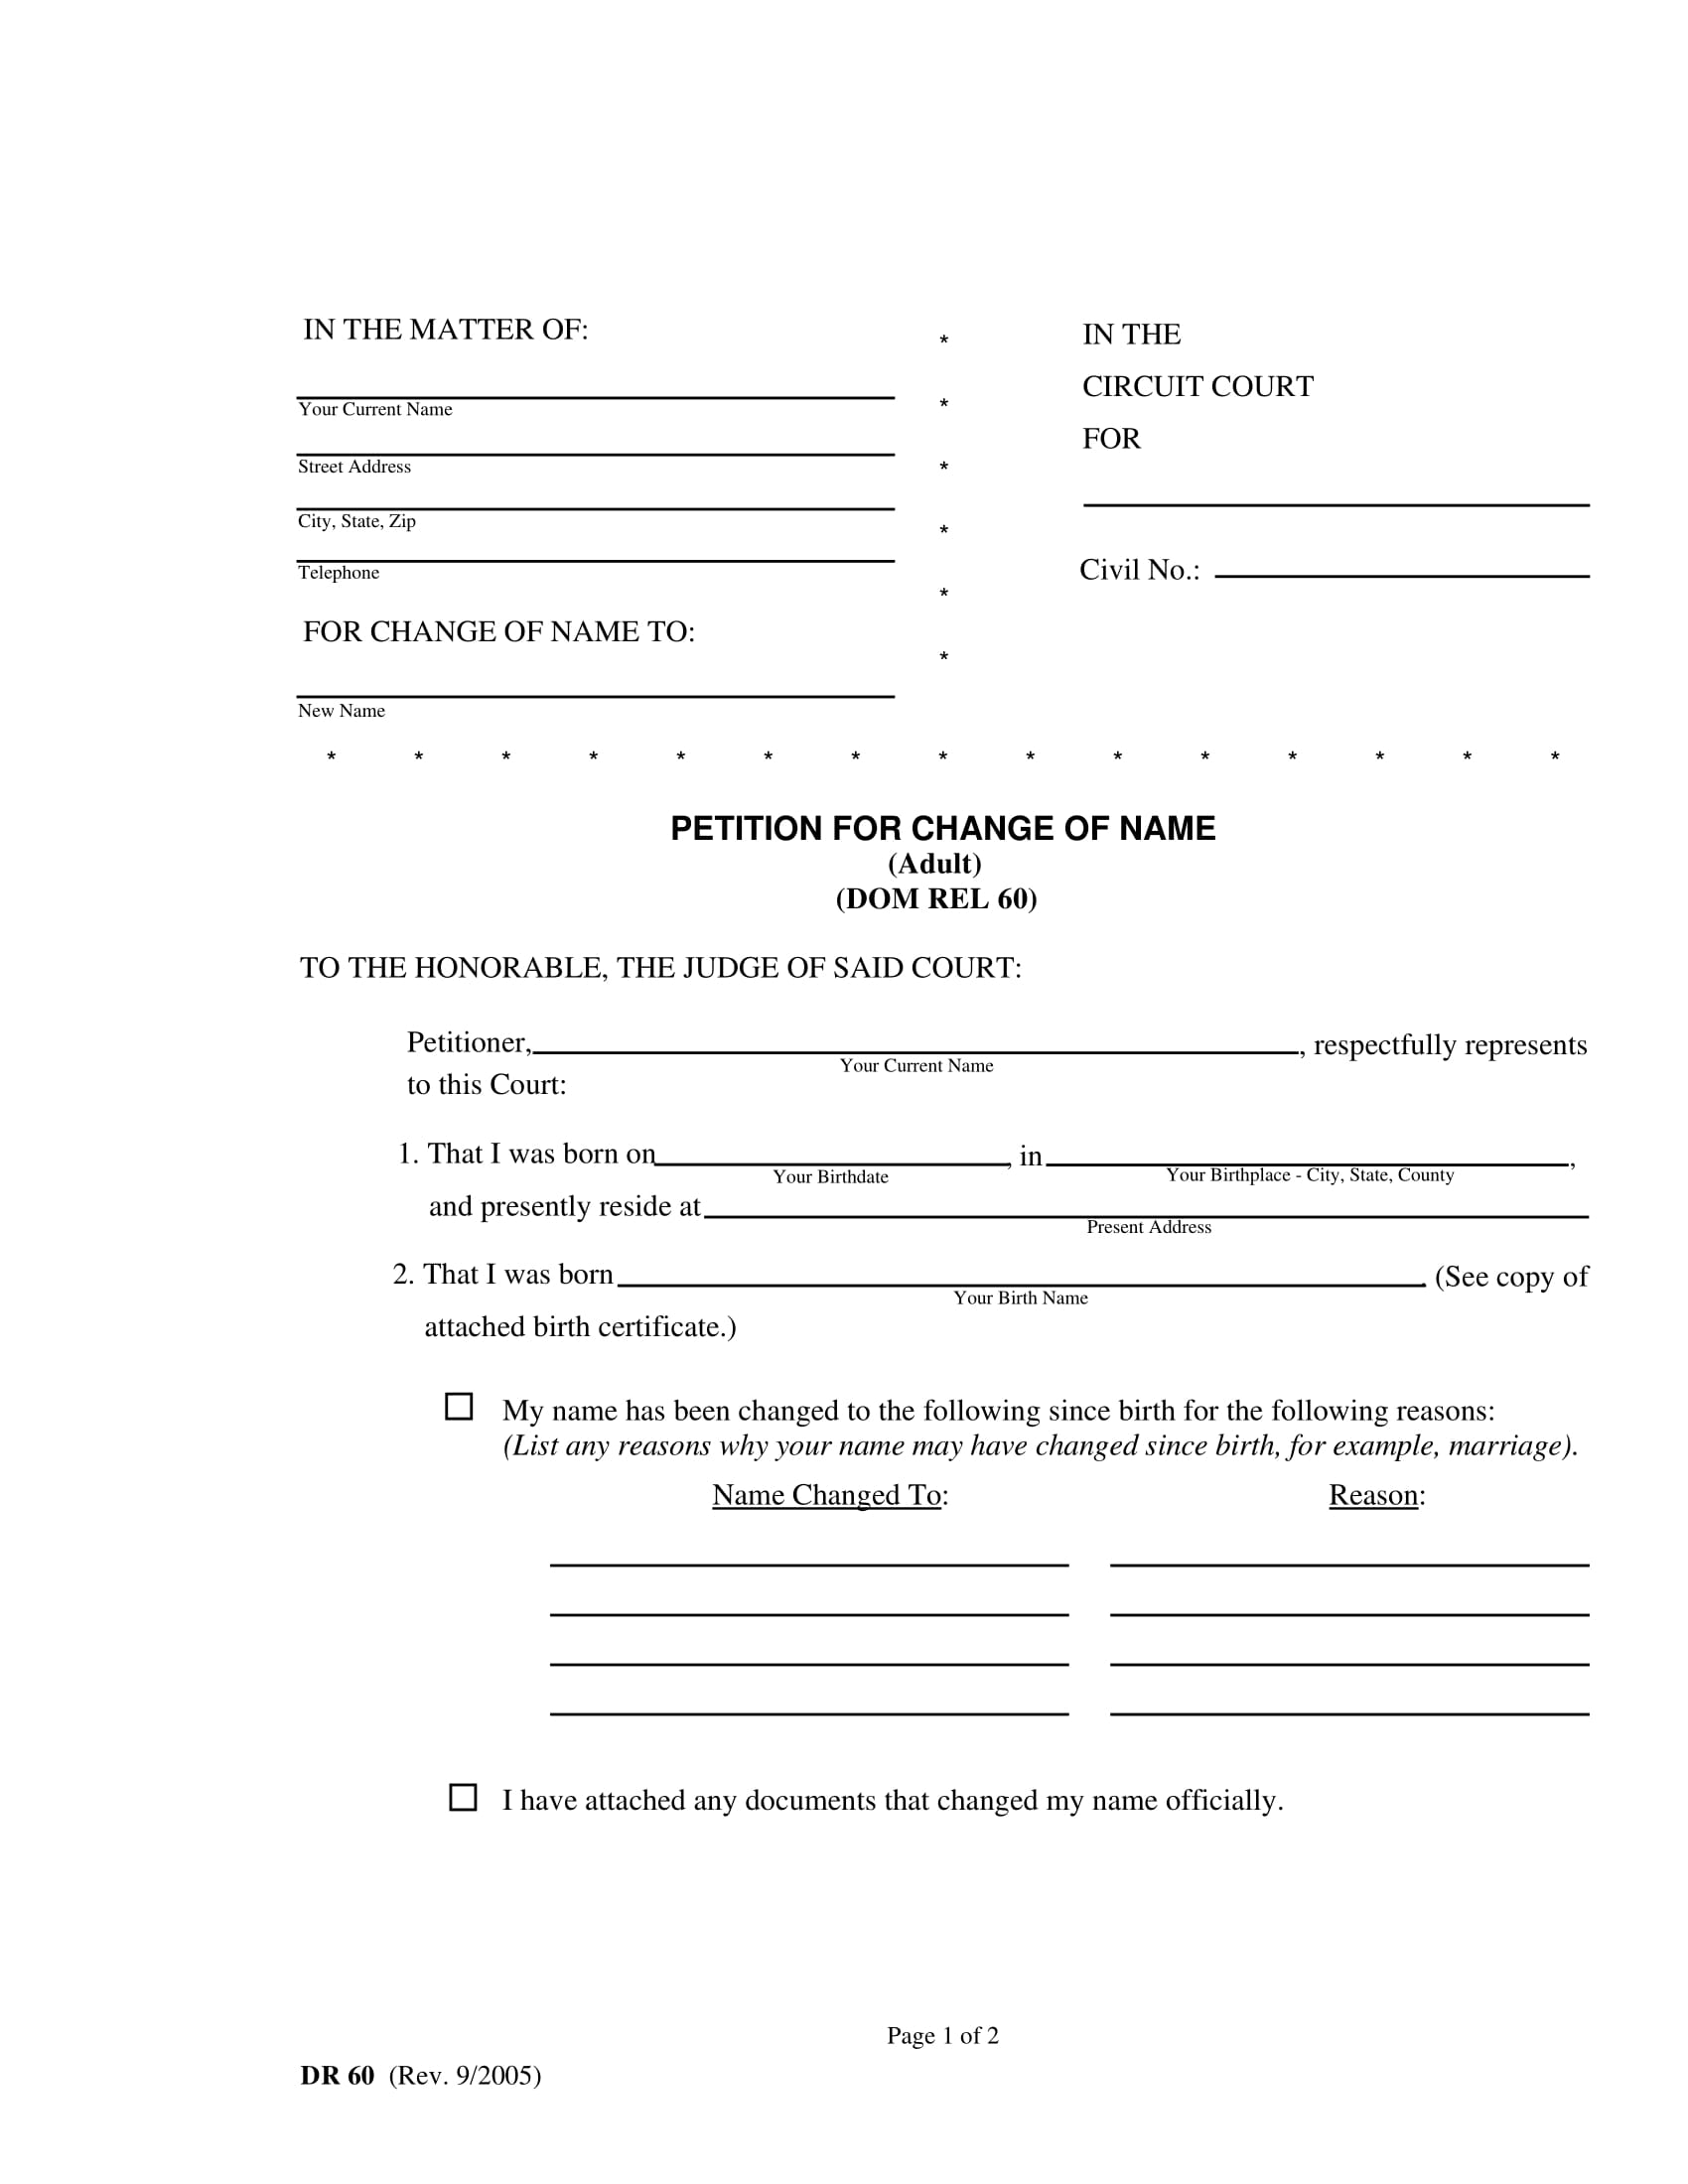 legal name change petition form 1